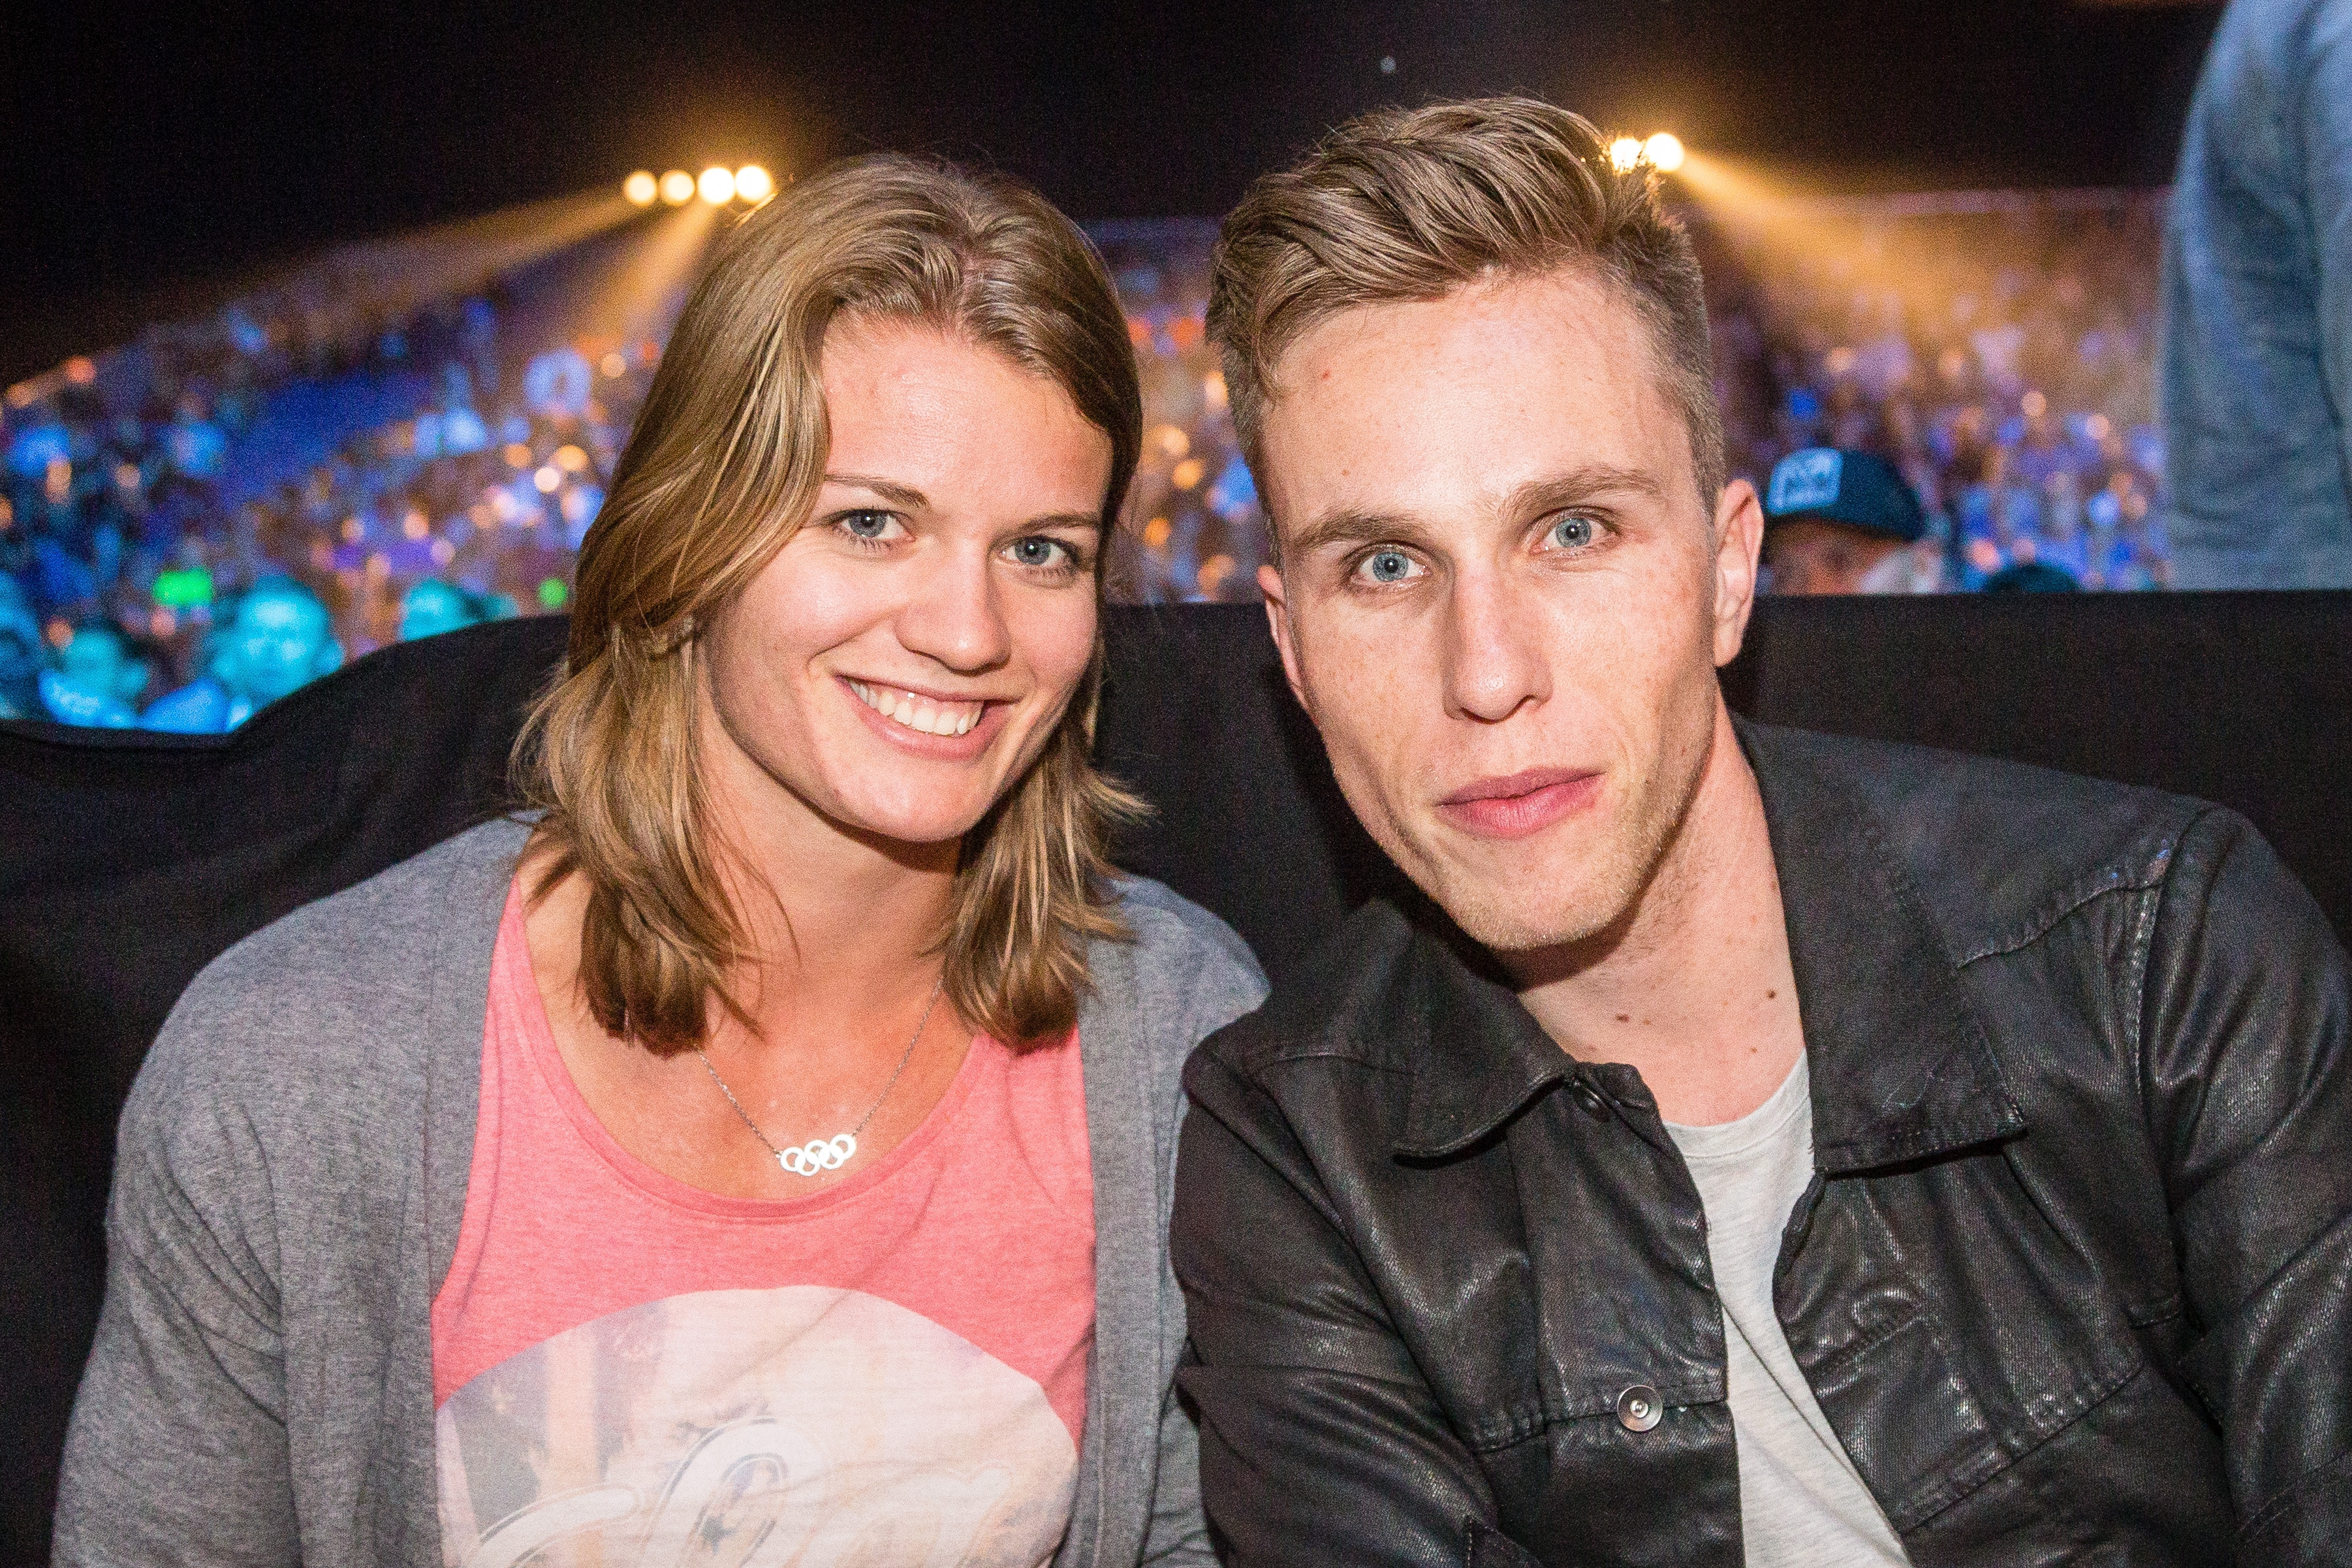 Nicky Romero Wallpaper Image Photos Pictures Background